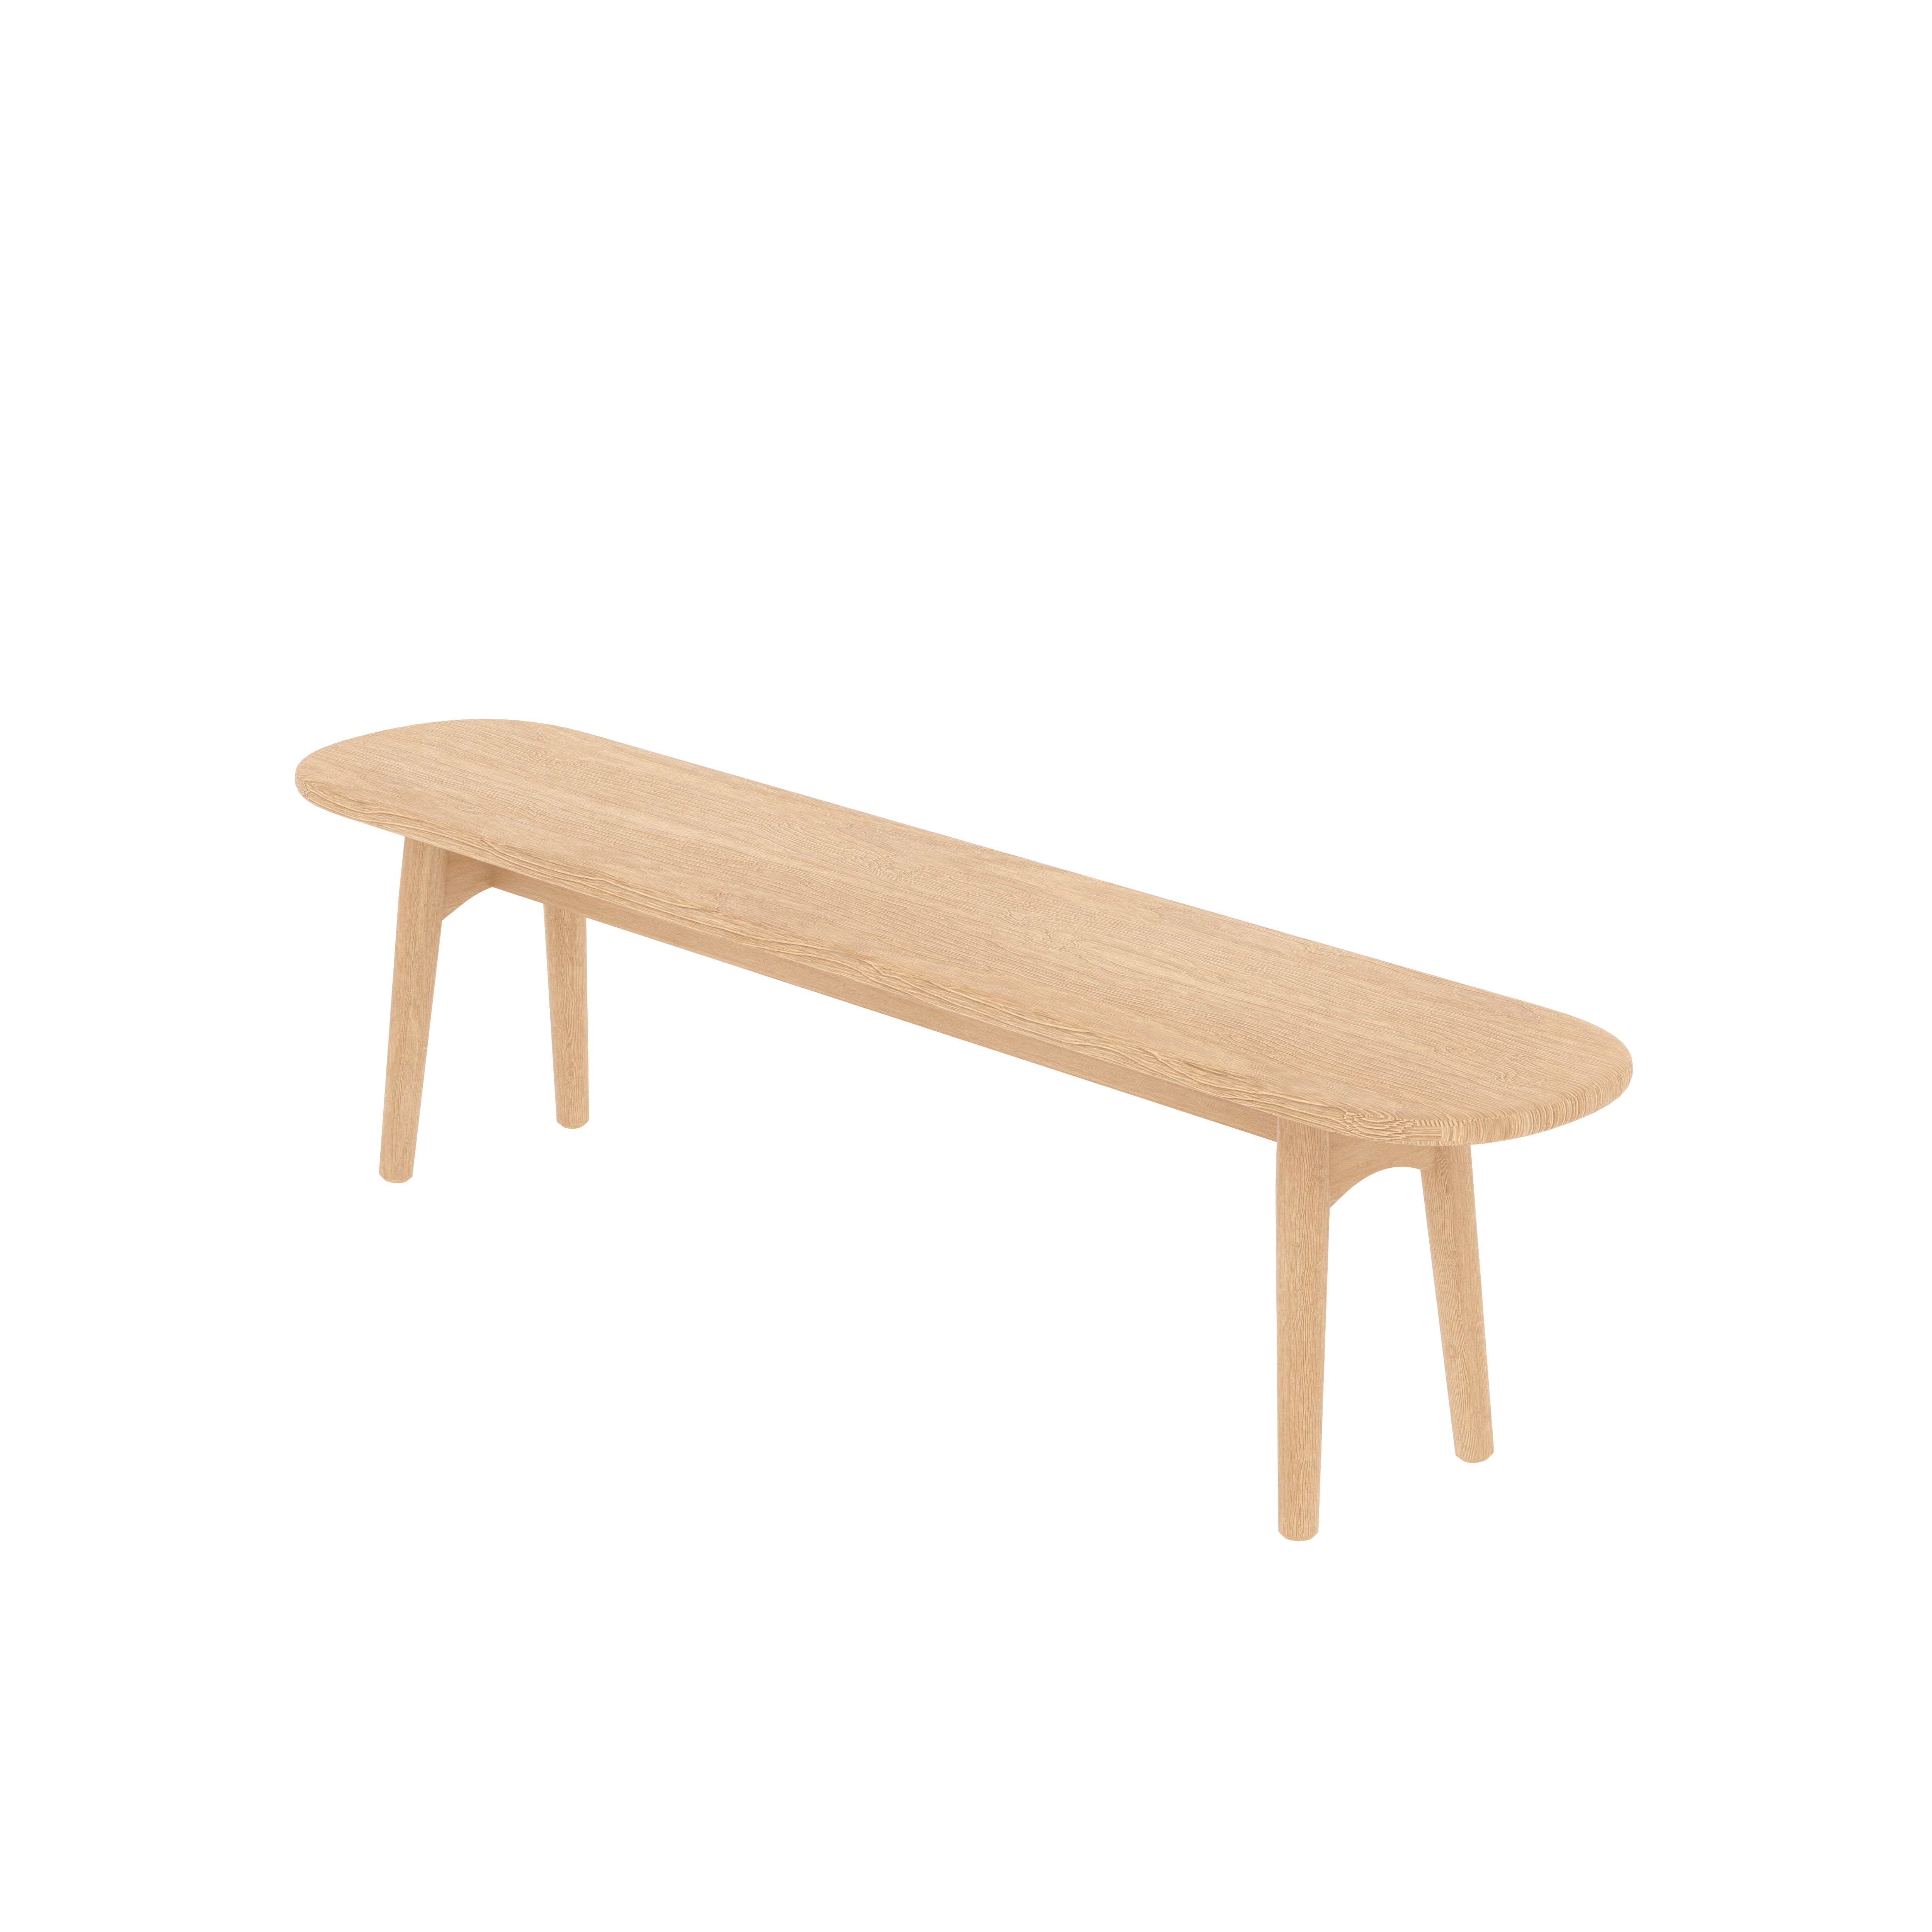 Oak Wood Bench With a Rounded Corner Top, Bench